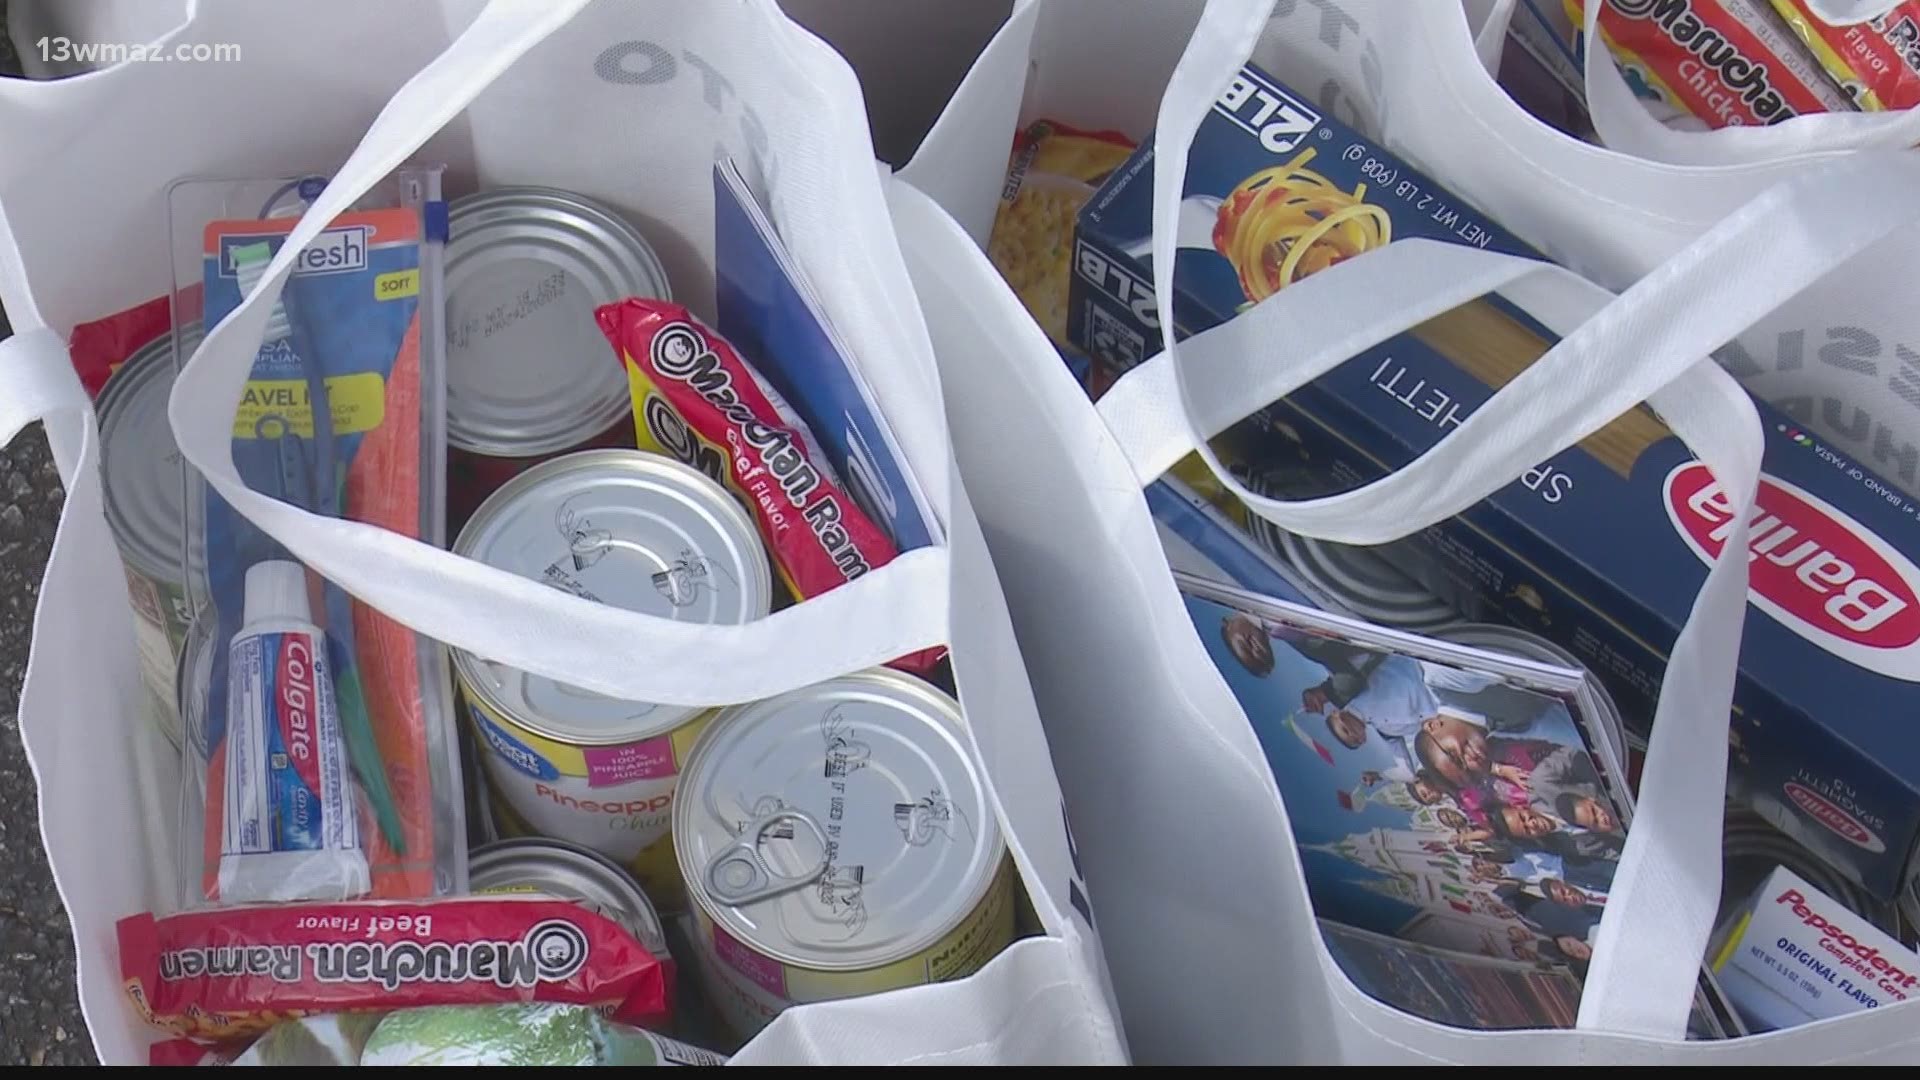 The Church of Christ held a free grocery drive-through event at the Motel 6 in Warner Robins on Saturday.